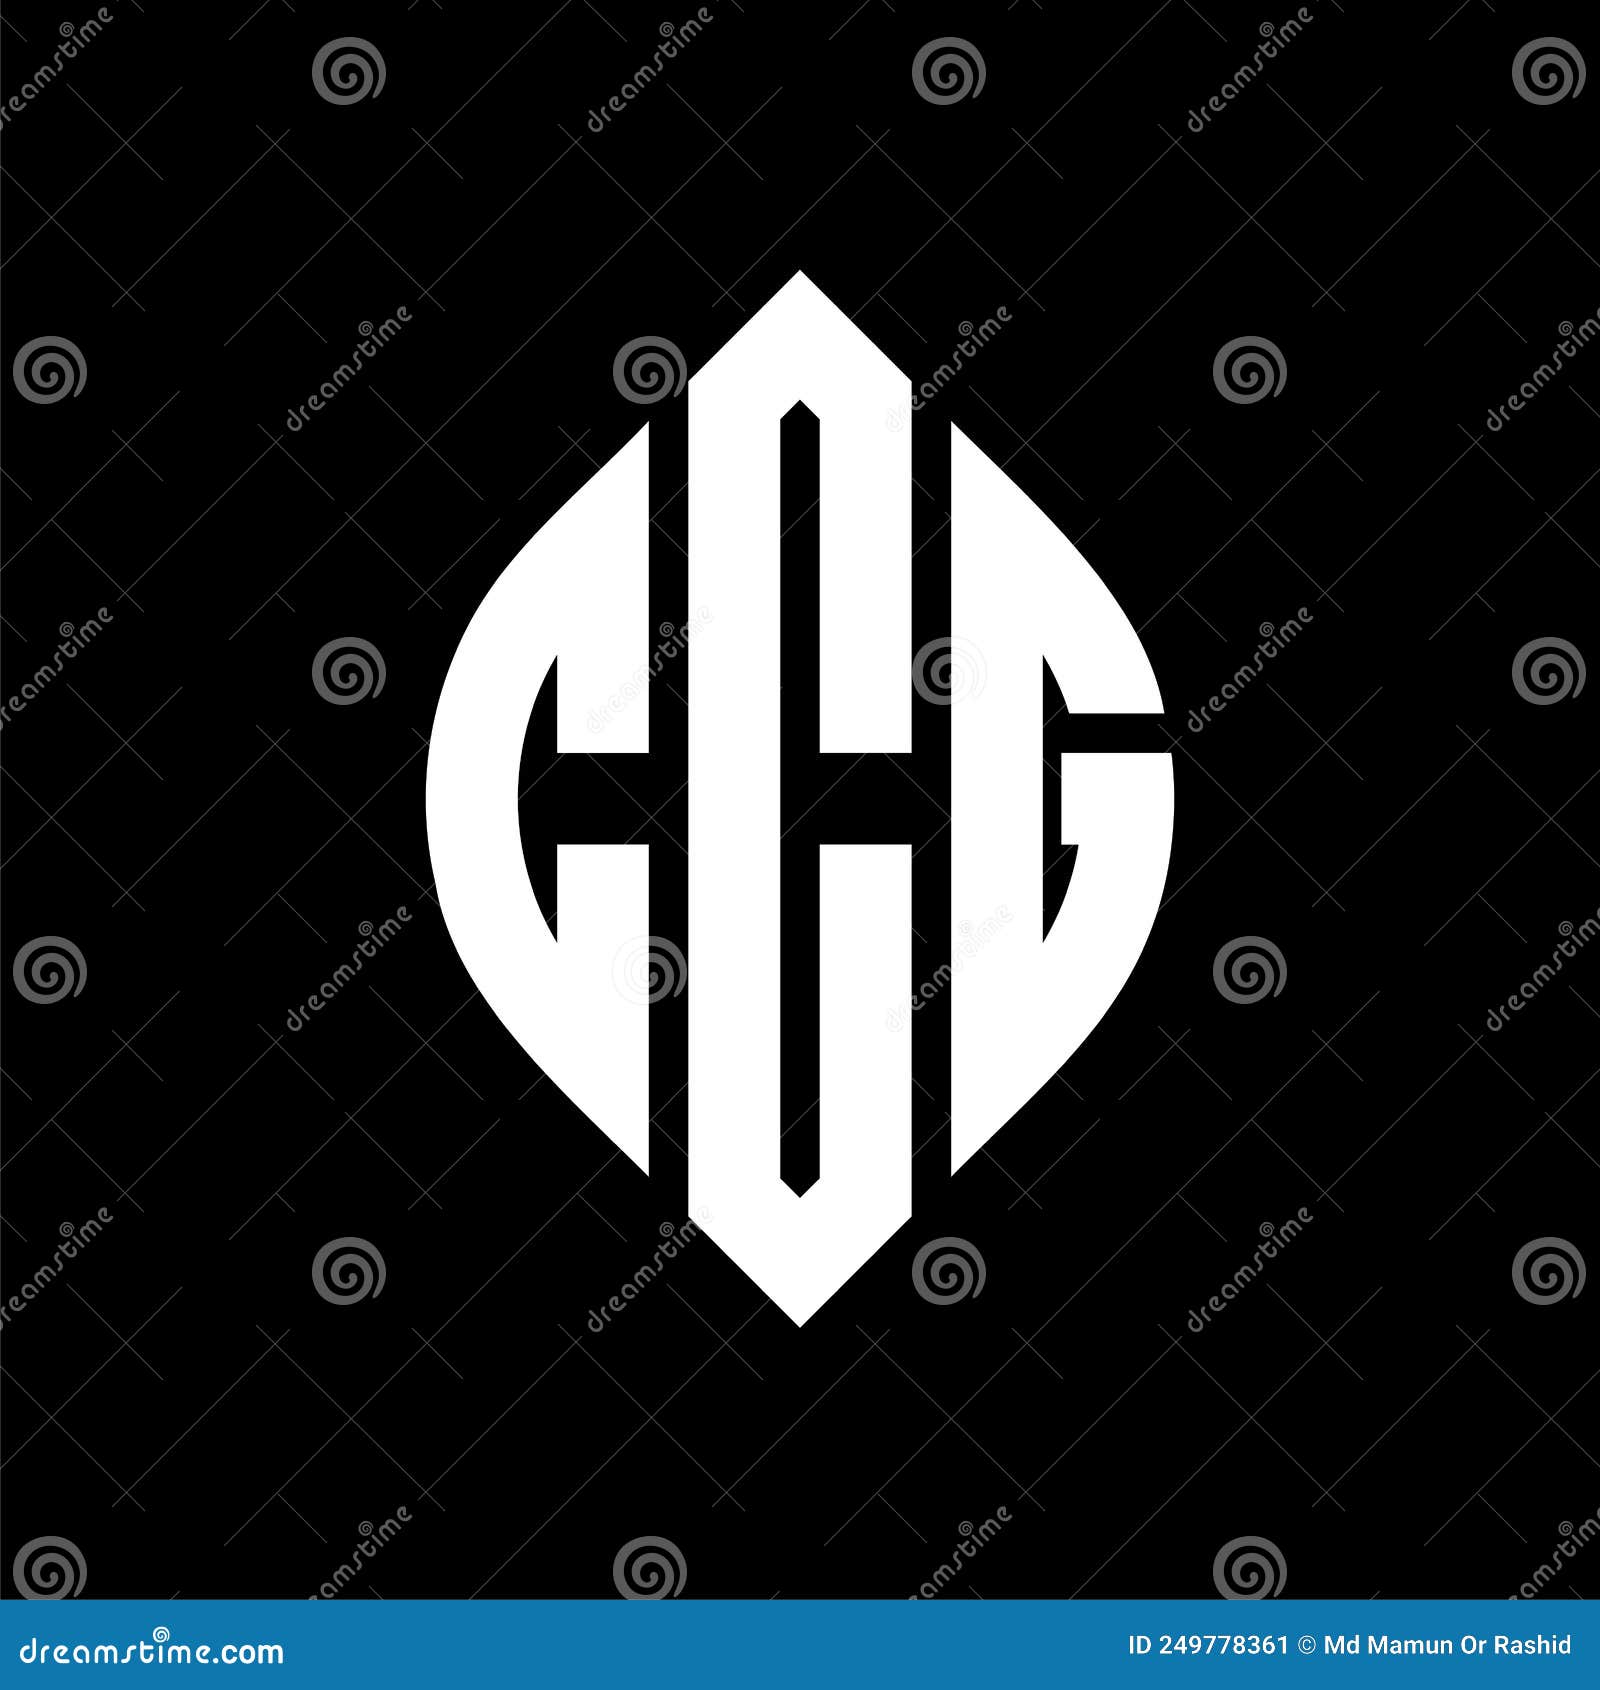 ccg circle letter logo  with circle and ellipse . ccg ellipse letters with typographic style. the three initials form a